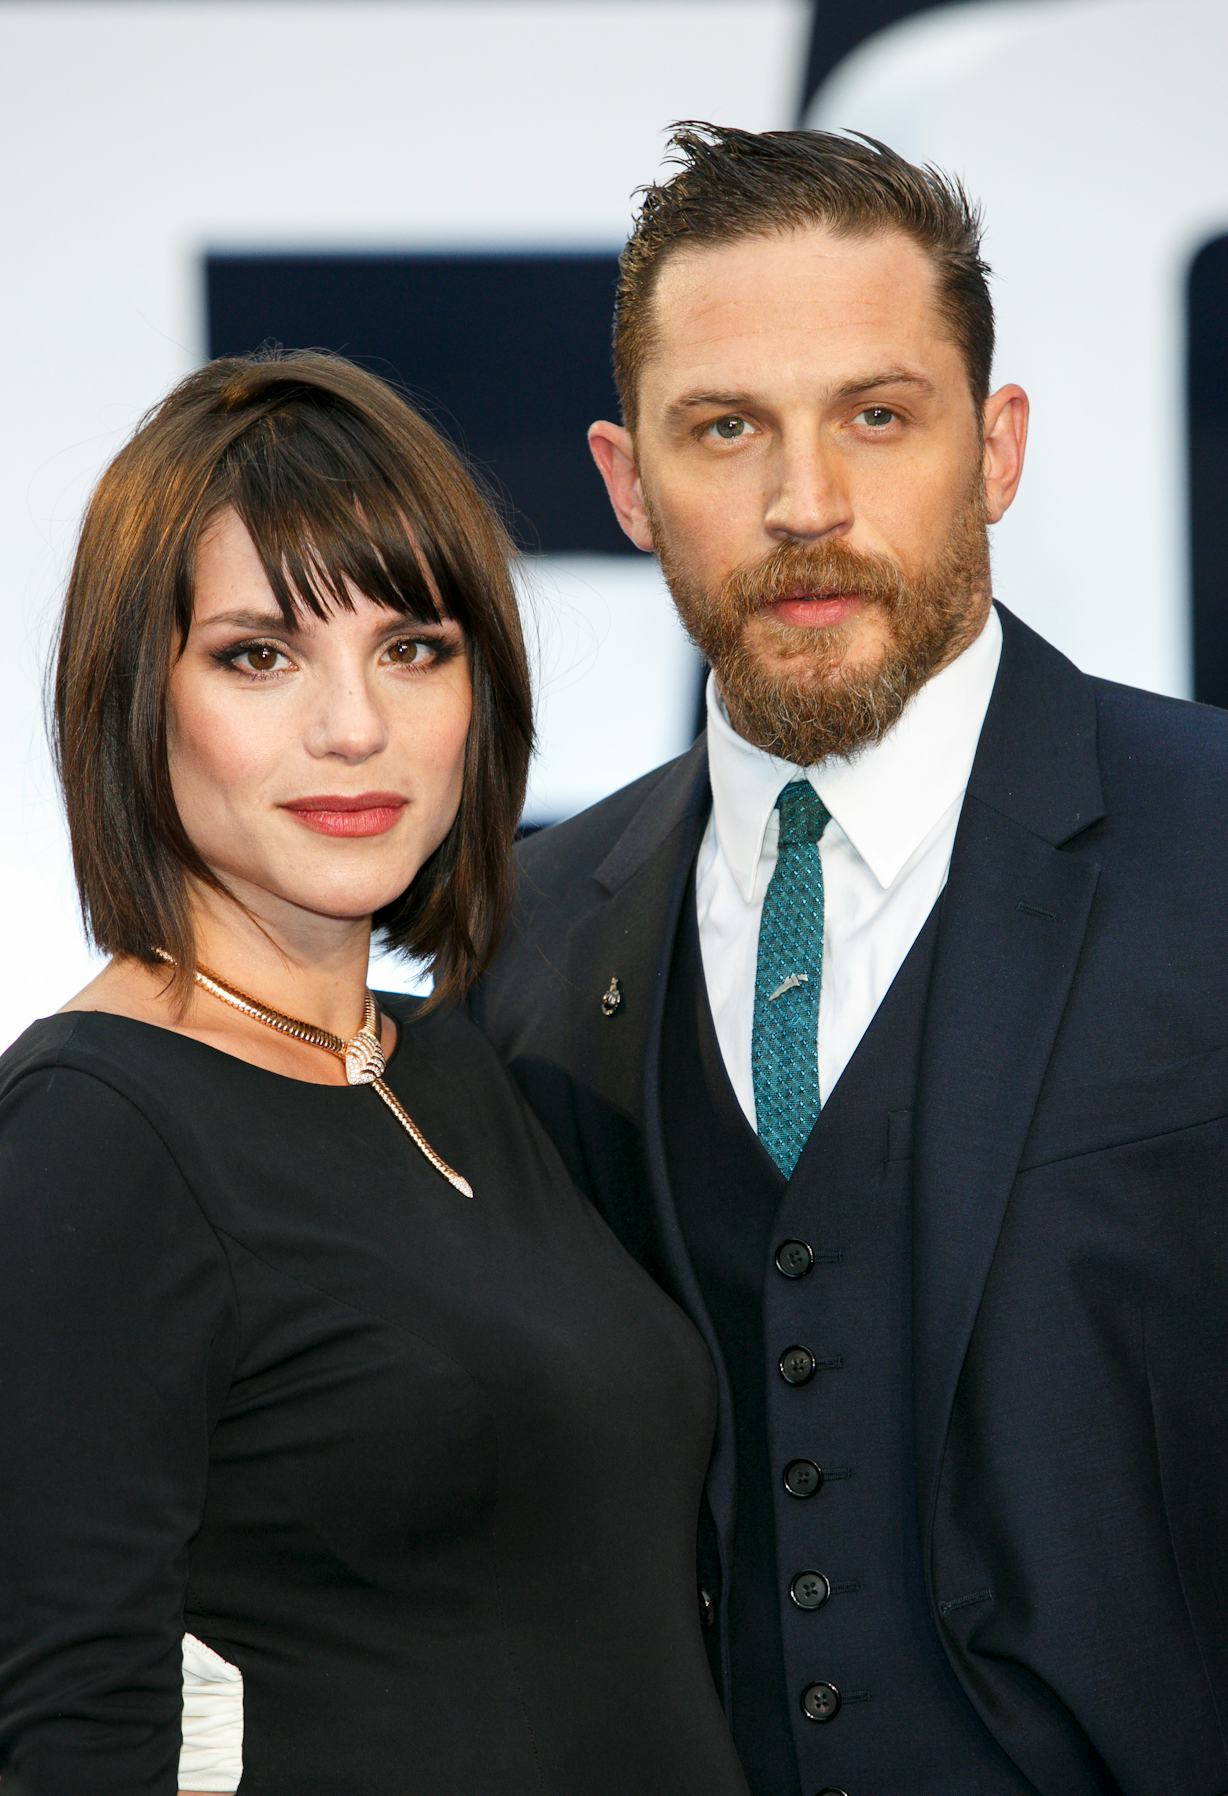 Photos Of Tom Hardy And Wife Charlotte Riley Prove They Re Going To Be The Most Adorbs Couple At